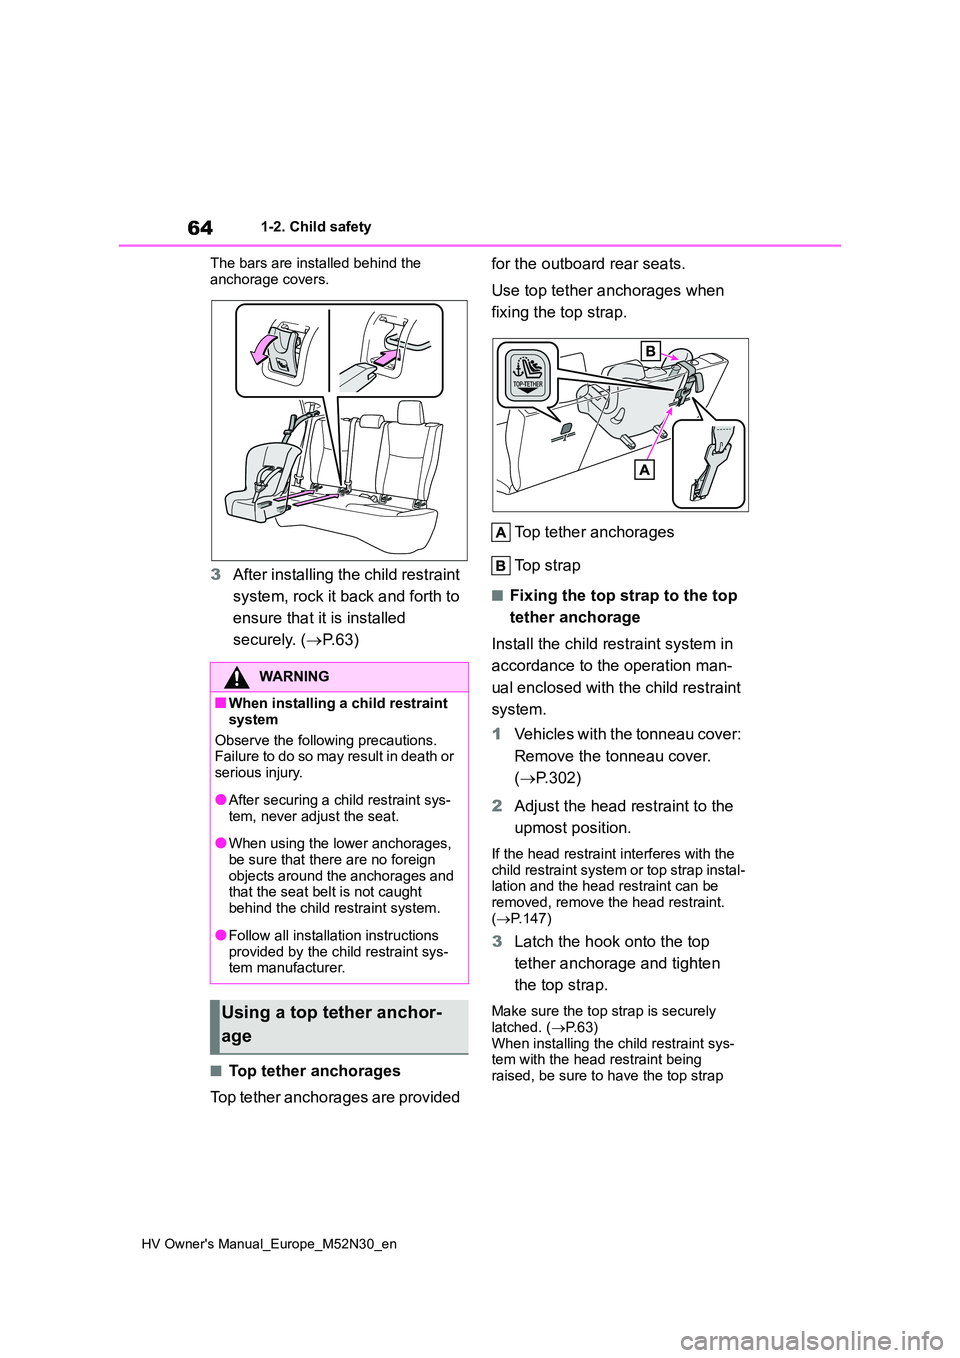 TOYOTA YARIS 2022 Owners Guide 64
HV Owner's Manual_Europe_M52N30_en
1-2. Child safety 
The bars are installed behind the  
anchorage covers.
3 After installing the child restraint  
system, rock it back and forth to  
ensure t